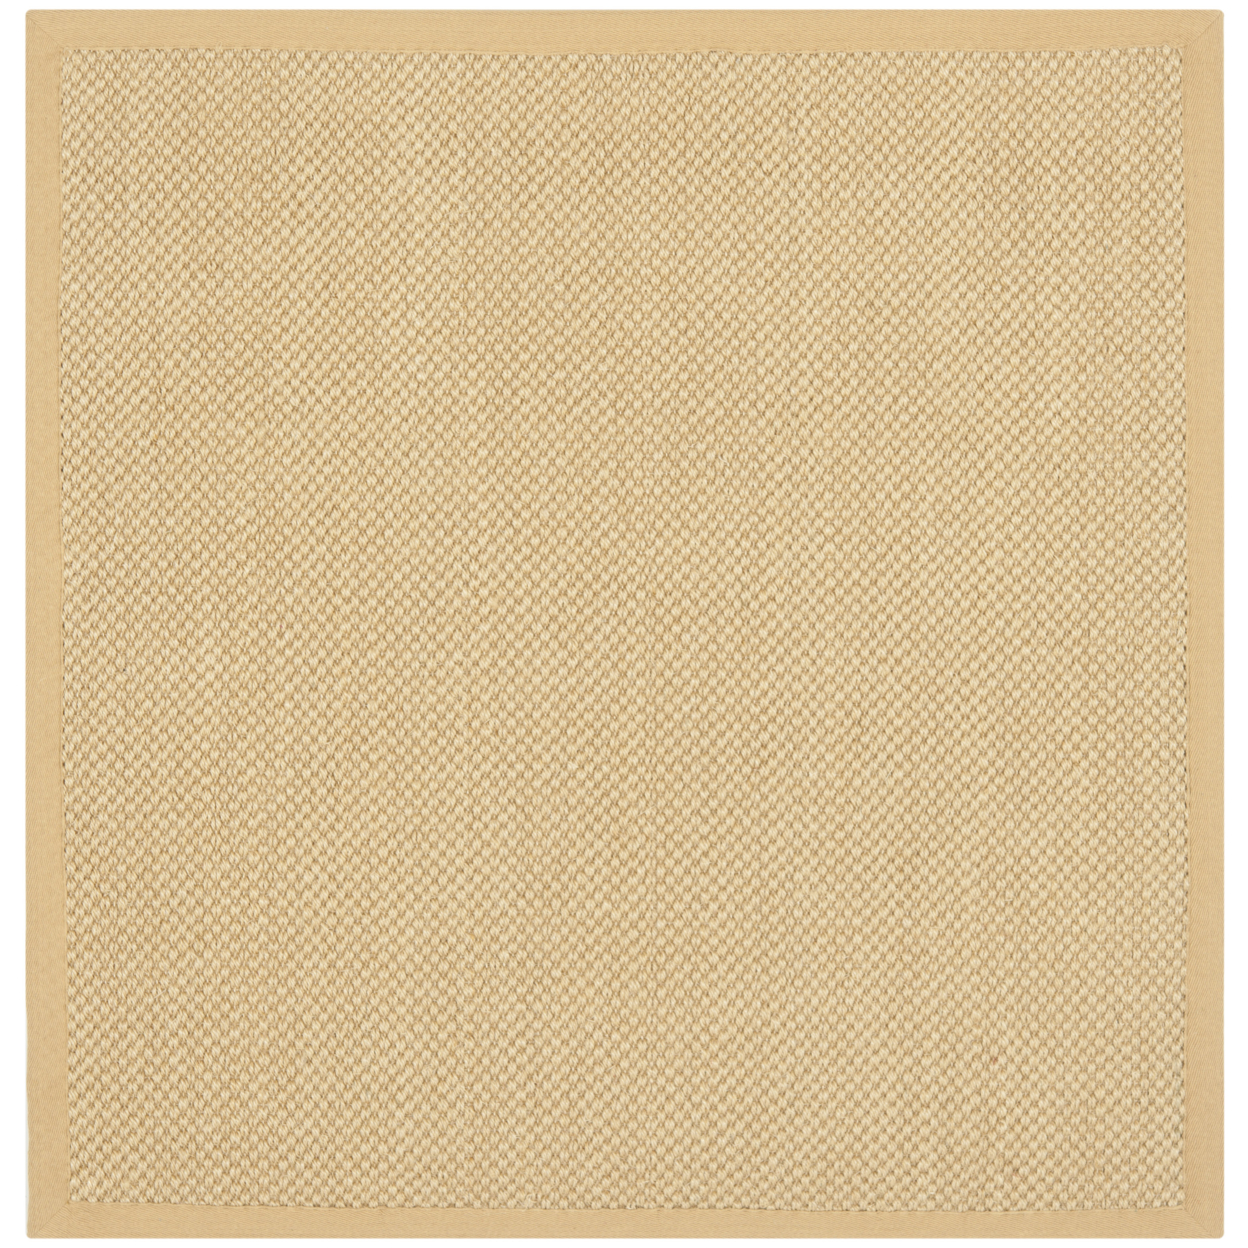 SAFAVIEH Natural Fiber Collection NF443A Maize/Wheat Rug - 10' Square